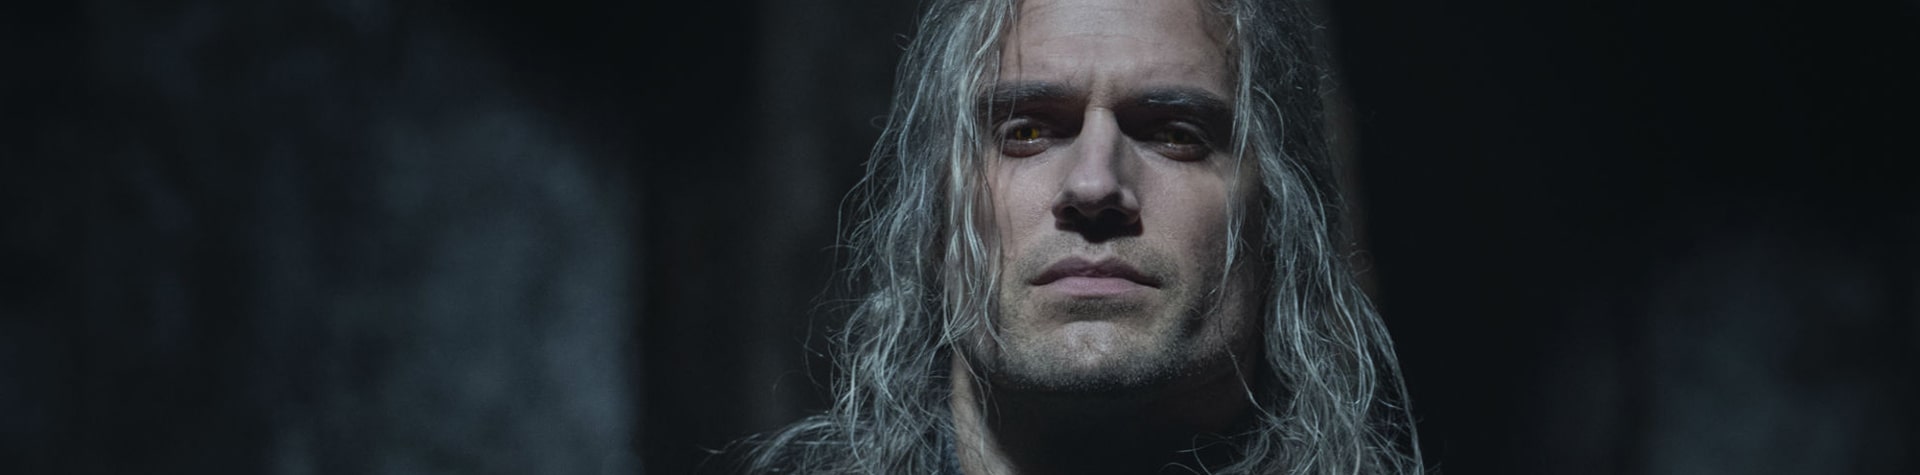 Joseph Trapanese – The Witcher S2